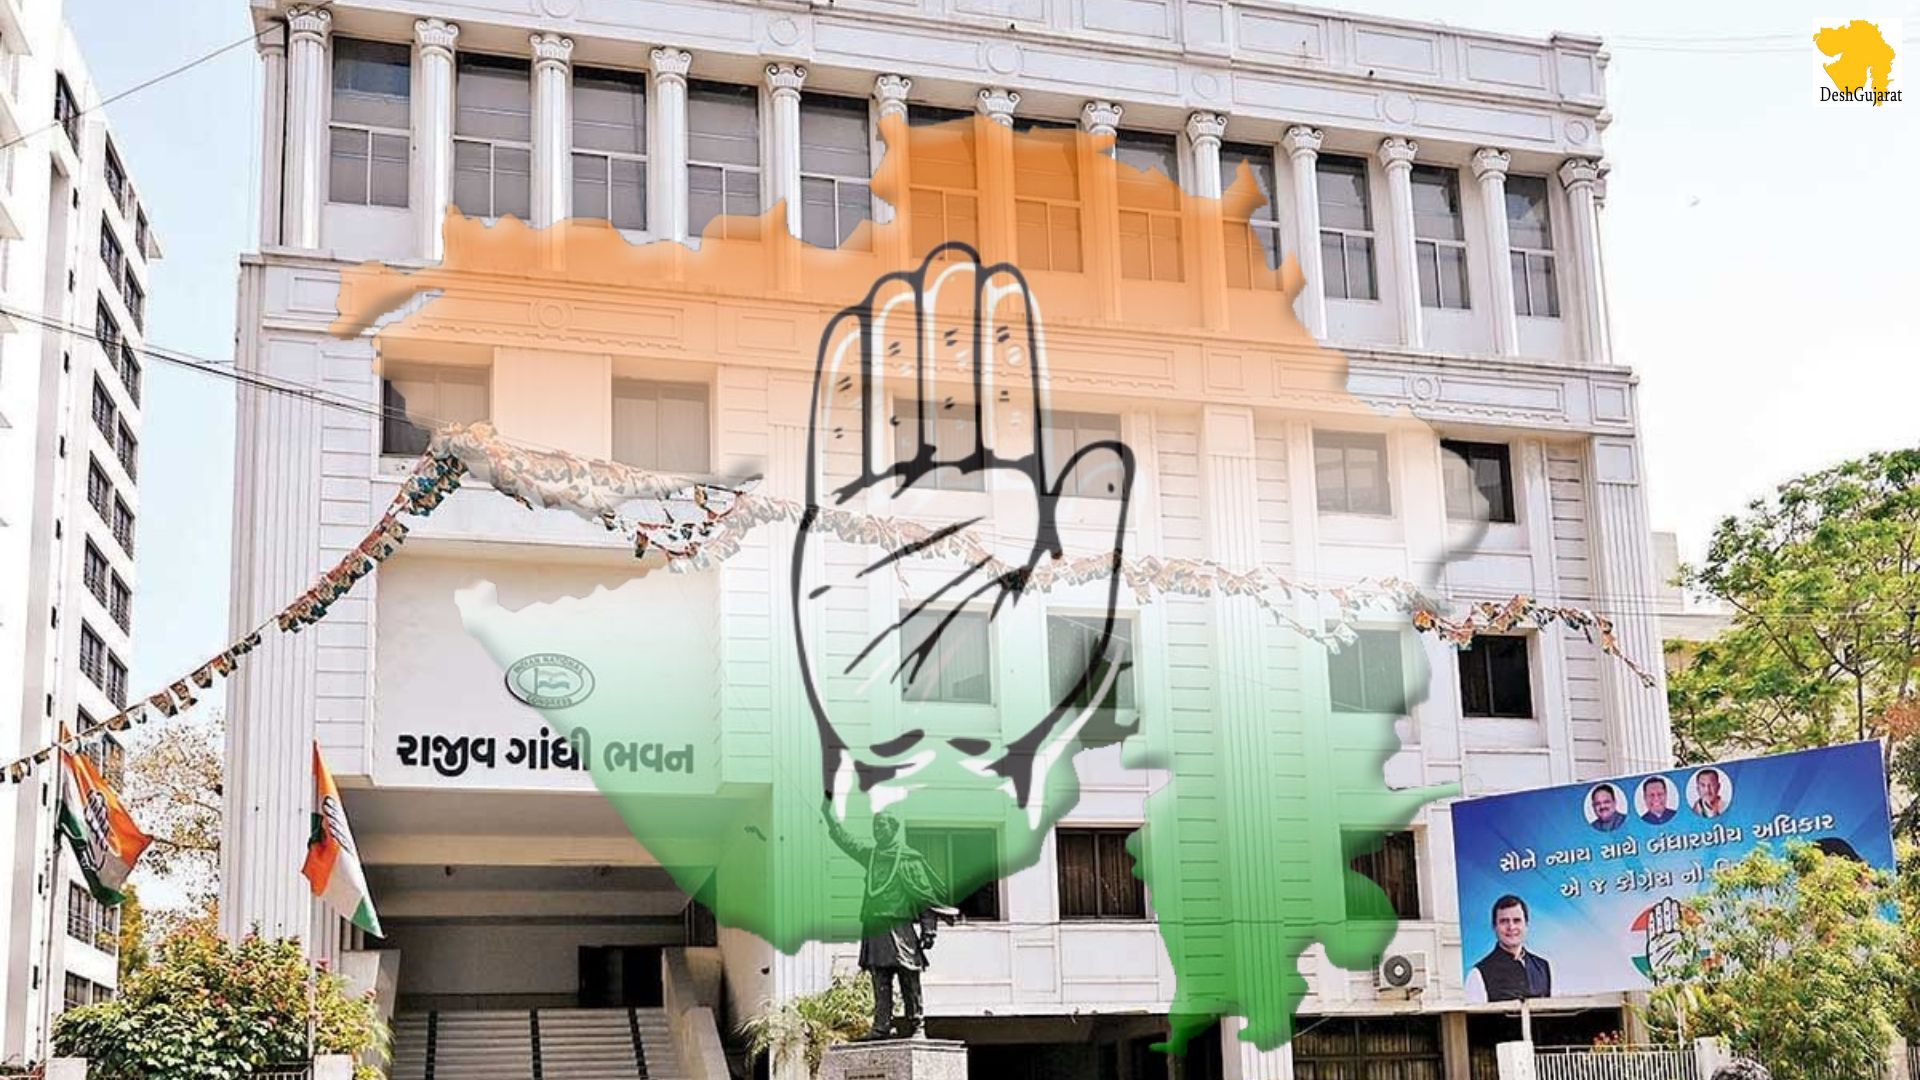 Congress declares three more candidates for Lok Sabha elections in Gujarat